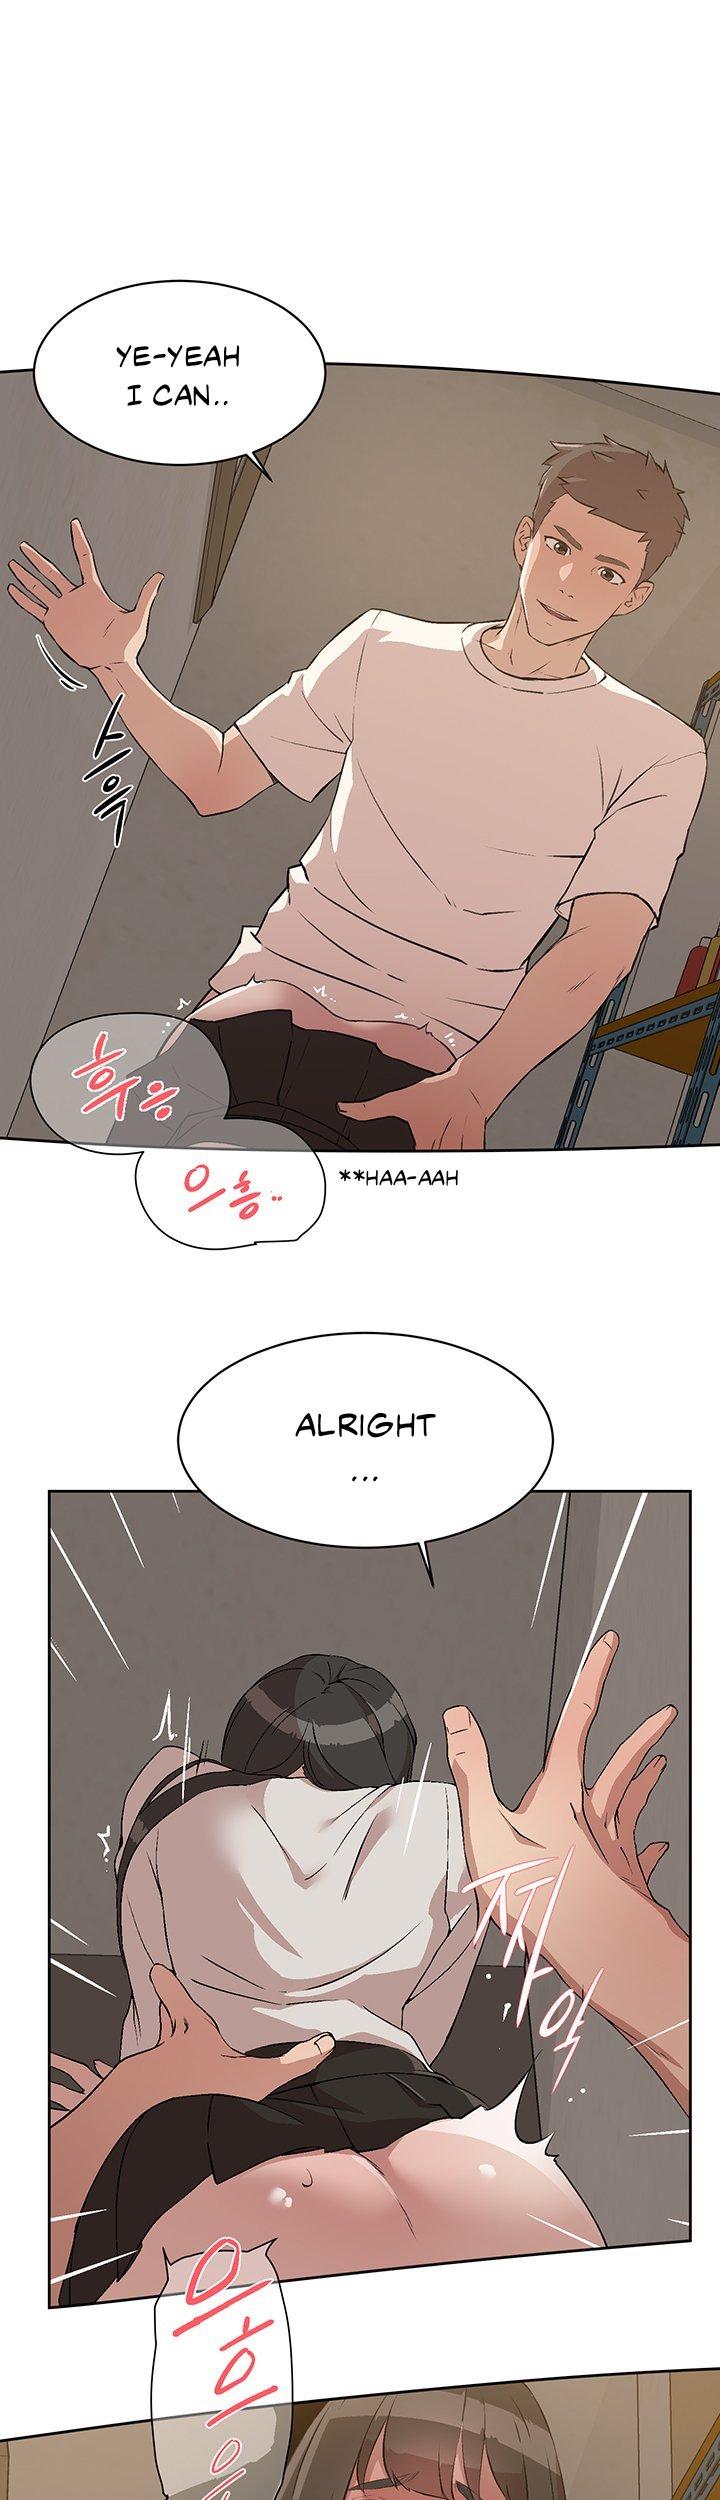 Softcore Everything about Best Friend Manhwa 01-13 Publico - Page 11